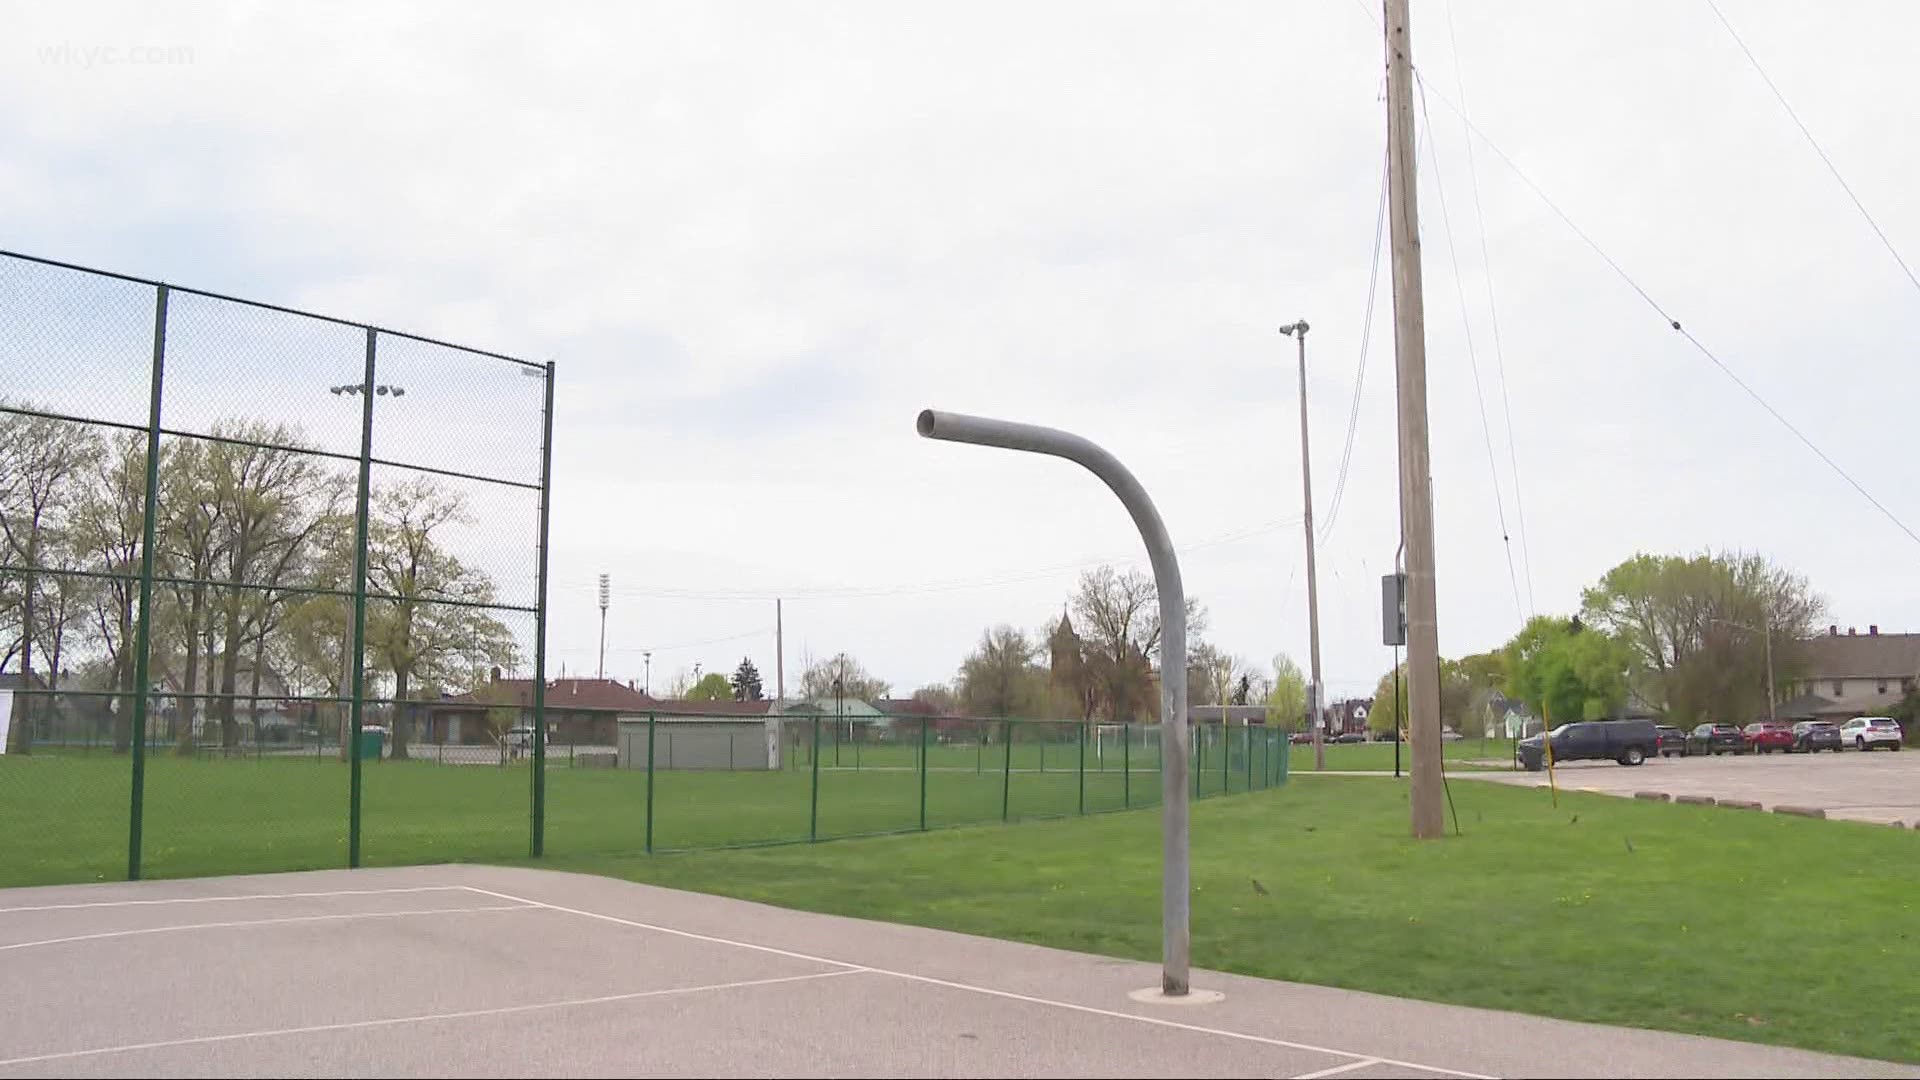 Police removed the hoops Friday, citing them as 'evidence' in recent shootings at the park.